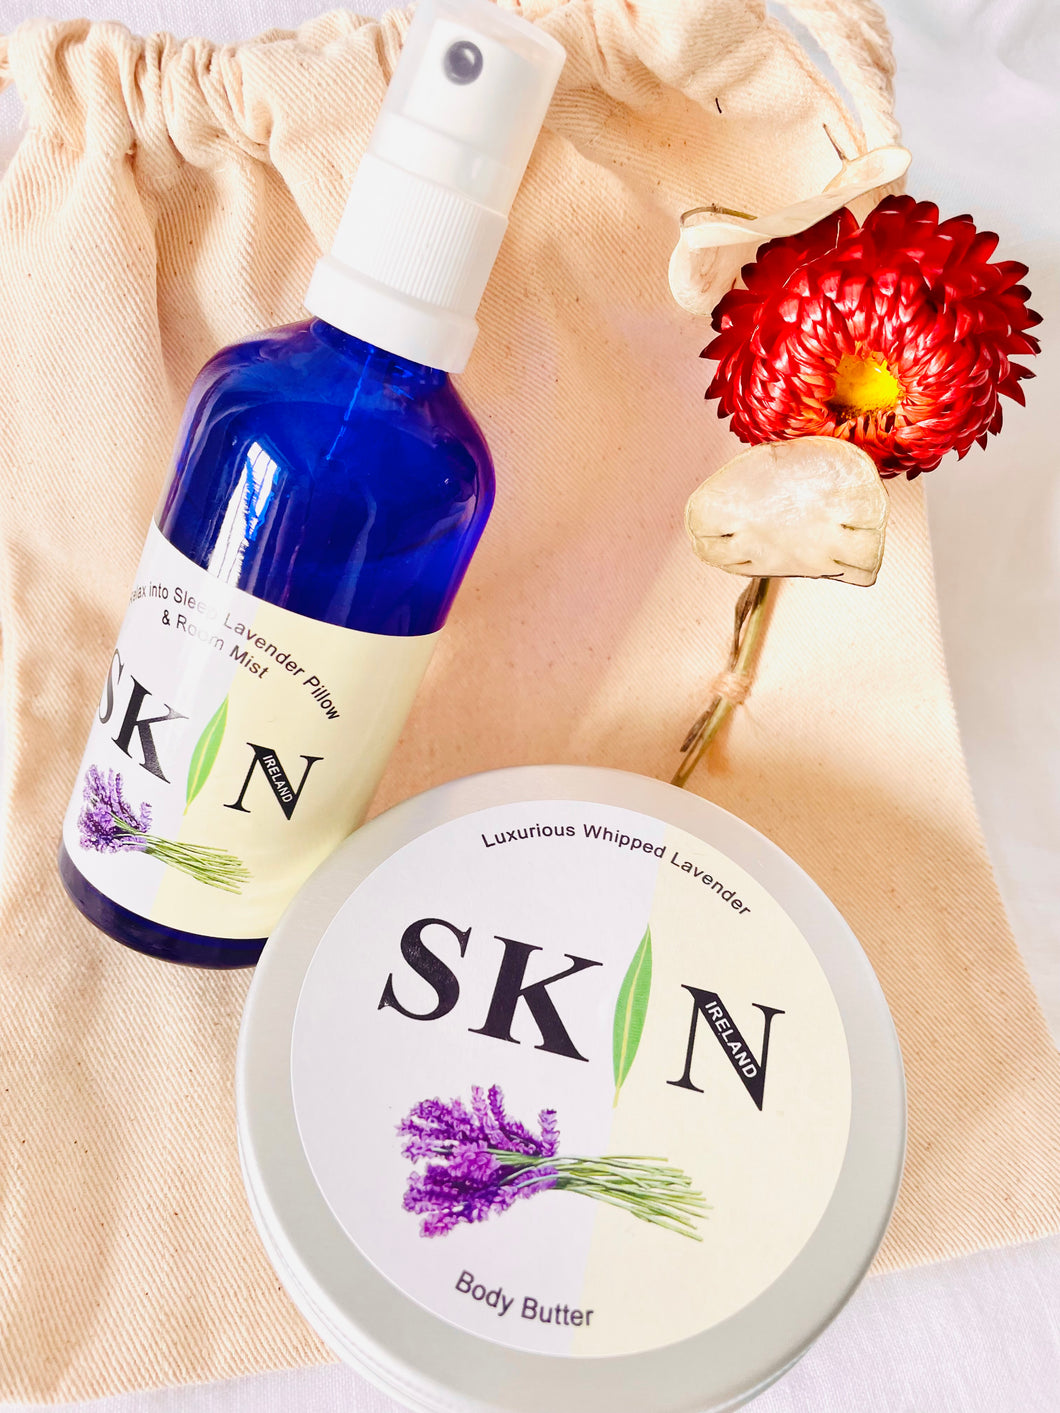 Gift Bag of Large (200ml) Luxurious Lavender Body Butter and Relax into Sleep Lavender Pillow and Room Mist.  Gift bag features Irish grown and naturally dried flower, hand-sewn onto linen bag.  Ready to gift - no wrapping necessary!